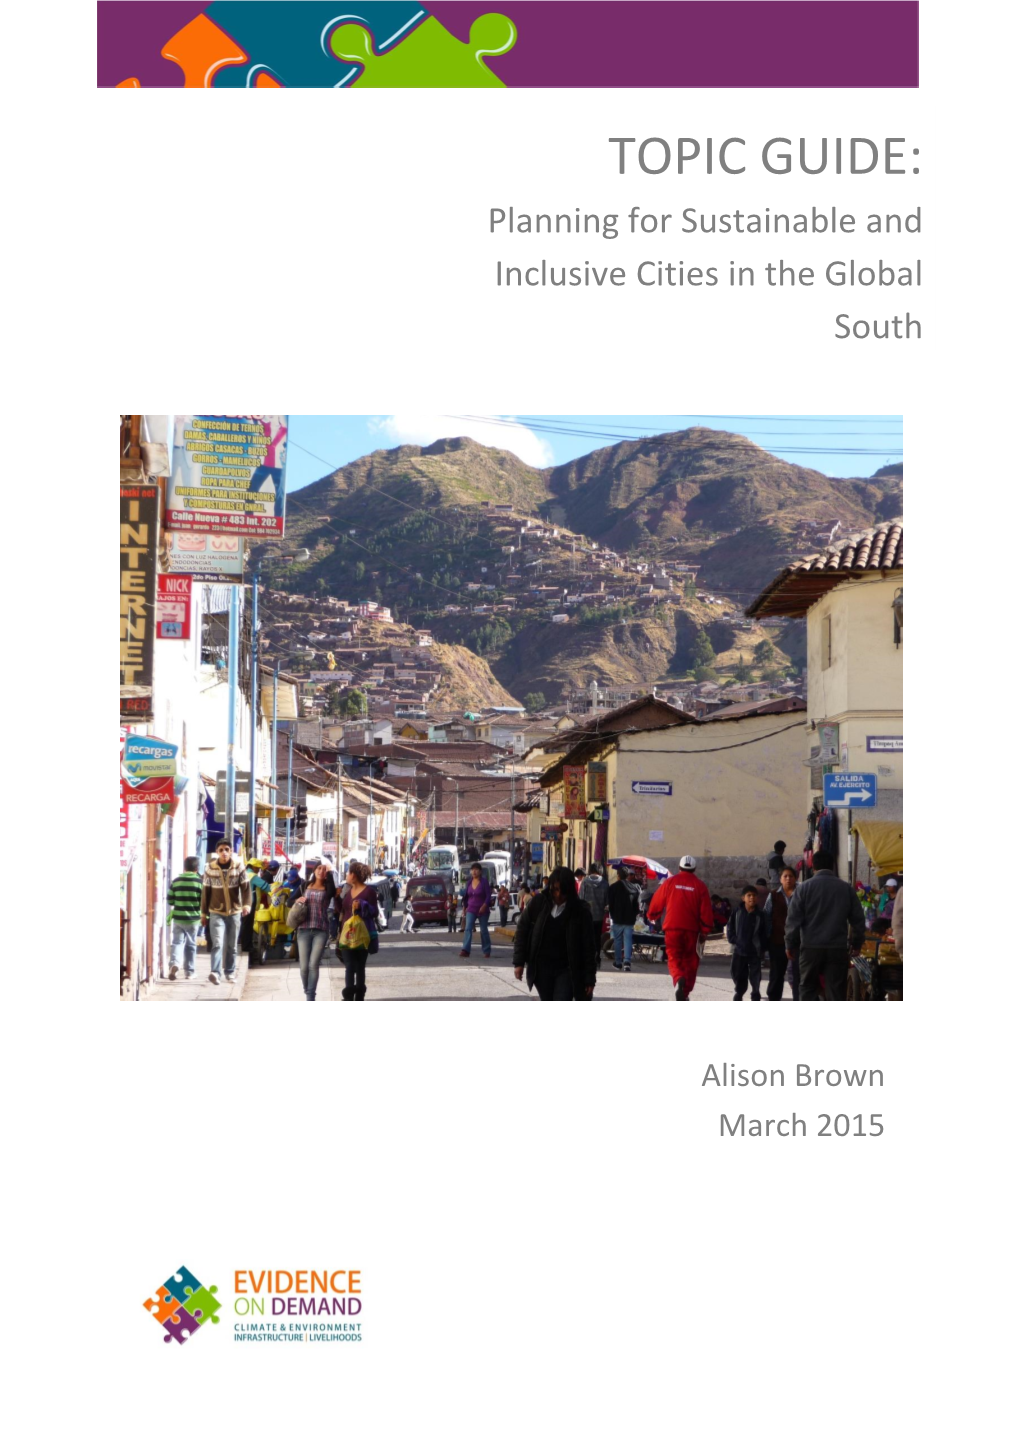 Topic Guide, Planning for Sustainable and Inclusive Cities in the Global